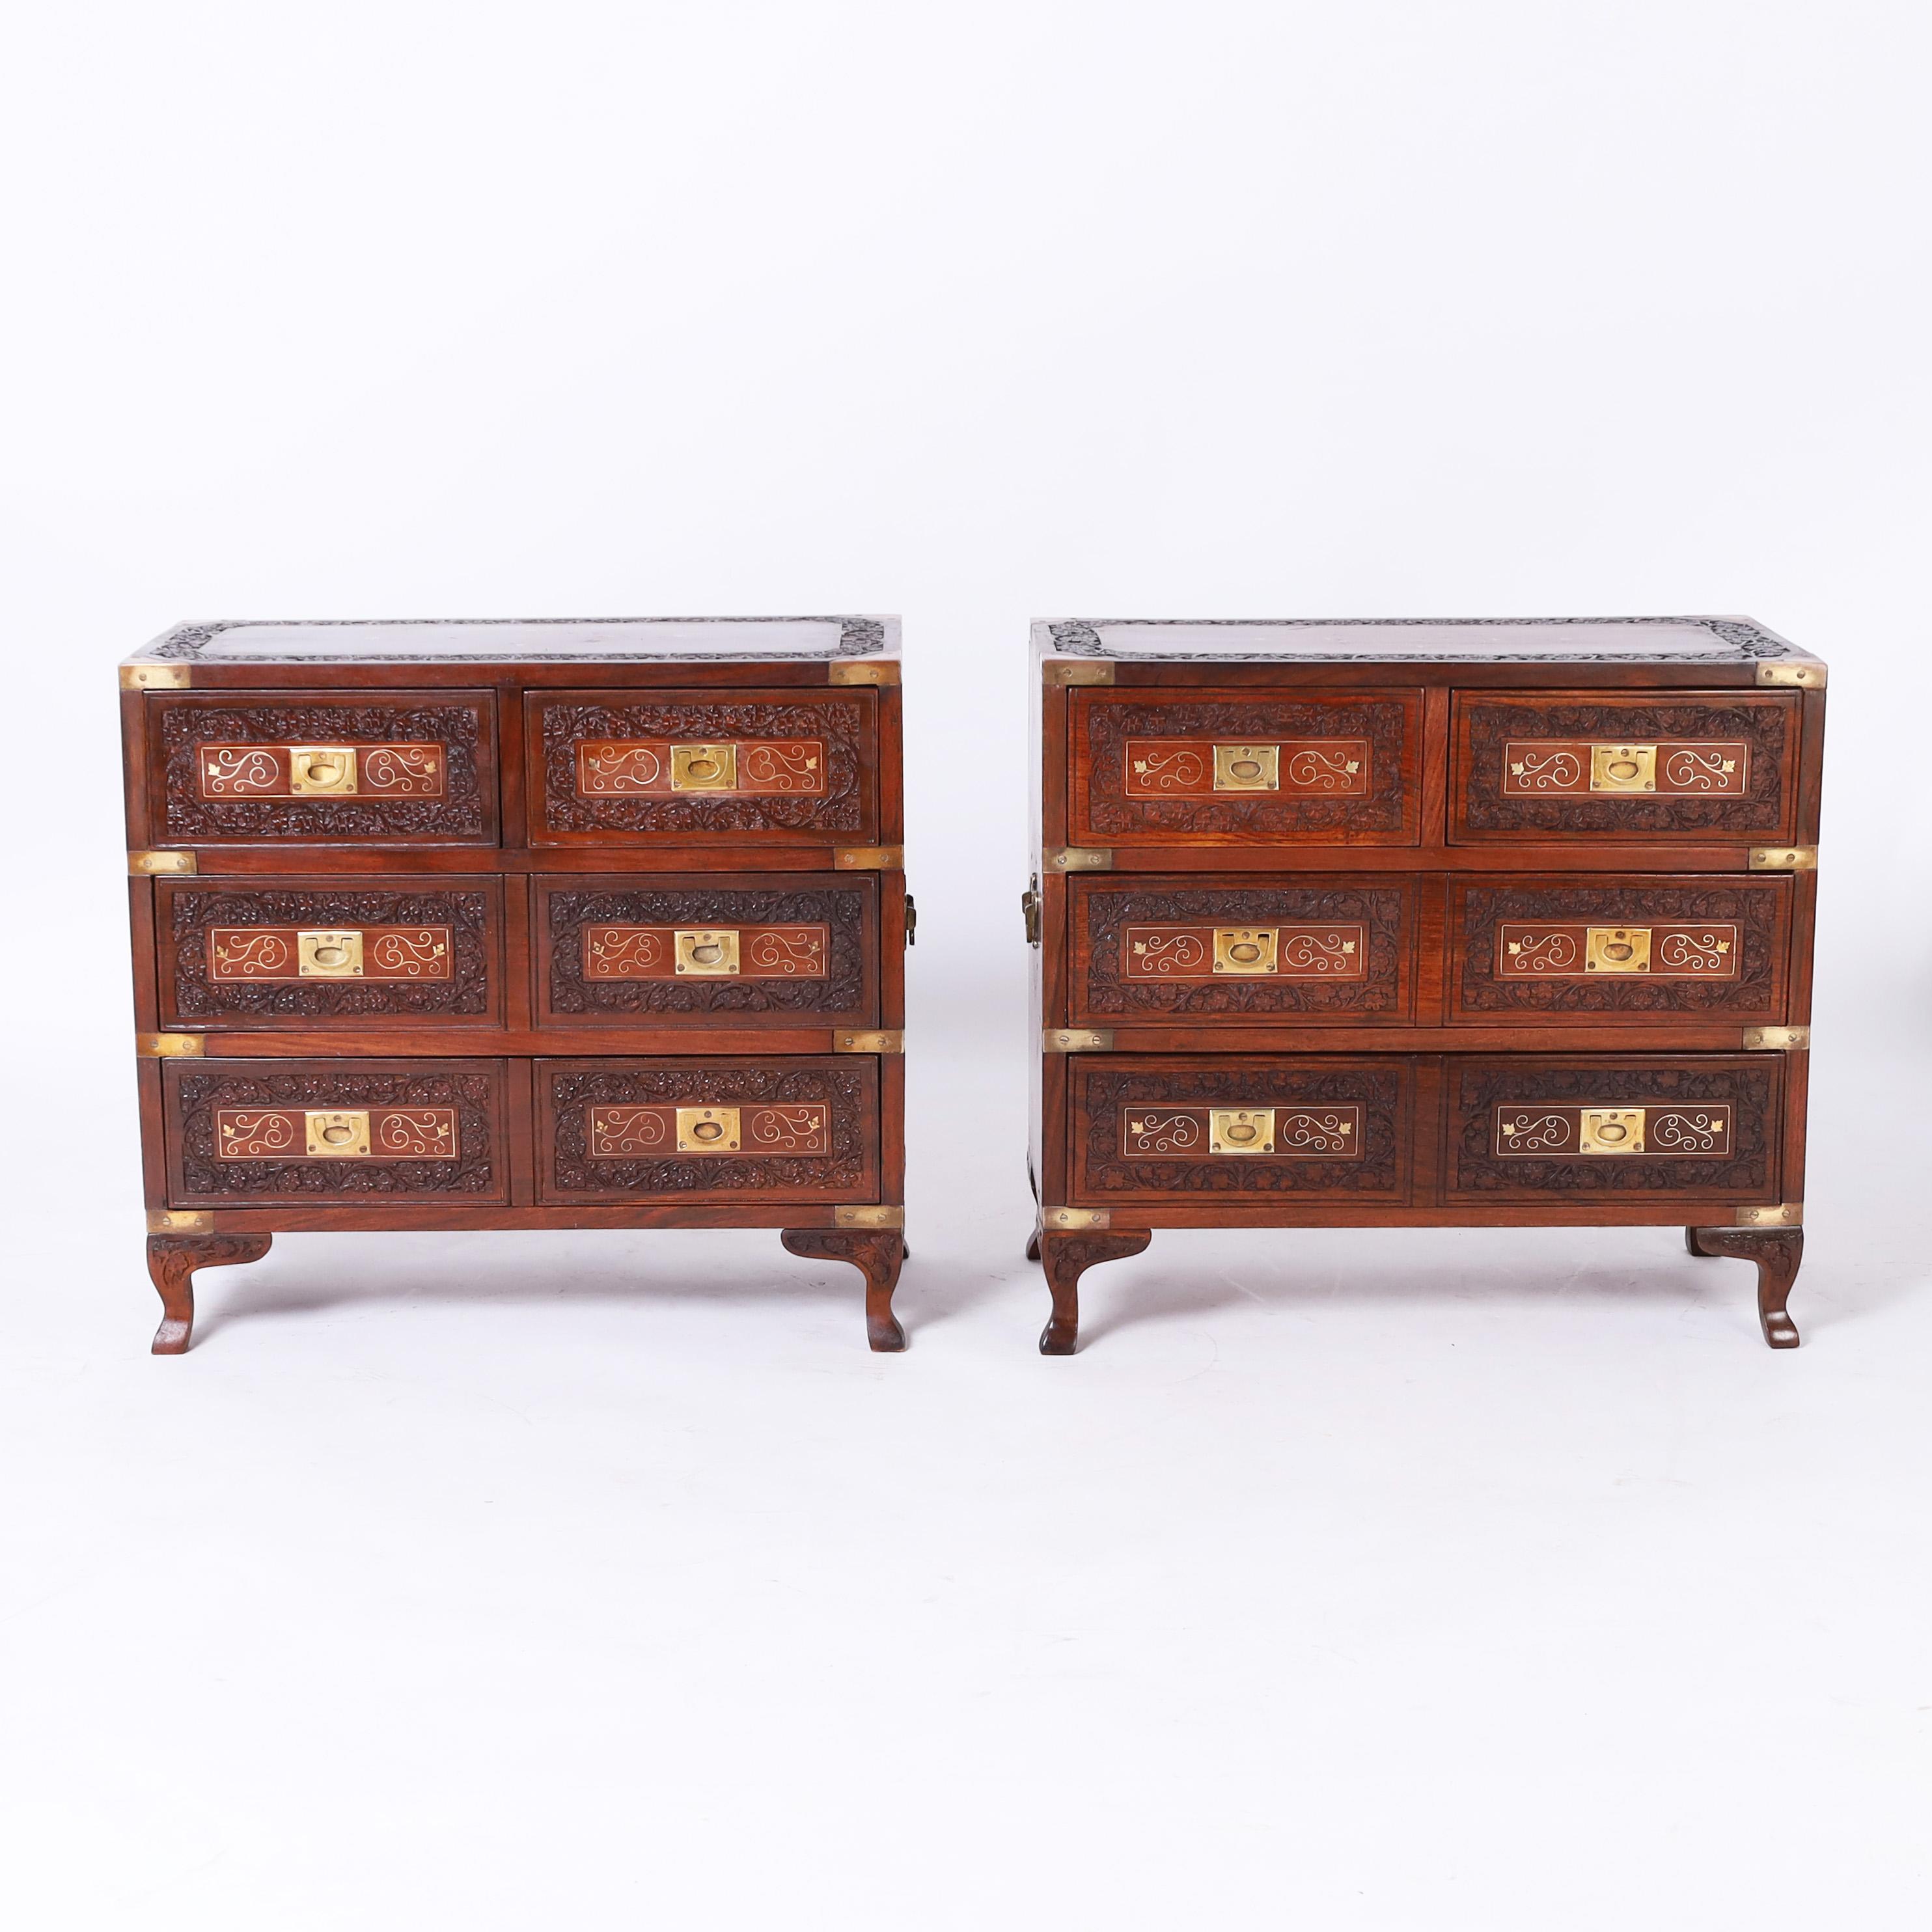 Impressive near pair of Anglo Indian campaign stands featuring tops with floral brass string inlaid medallions inside a carved border over a case having four drawers with brass inlays and carved floral borders, brass campaign hardware, side handles